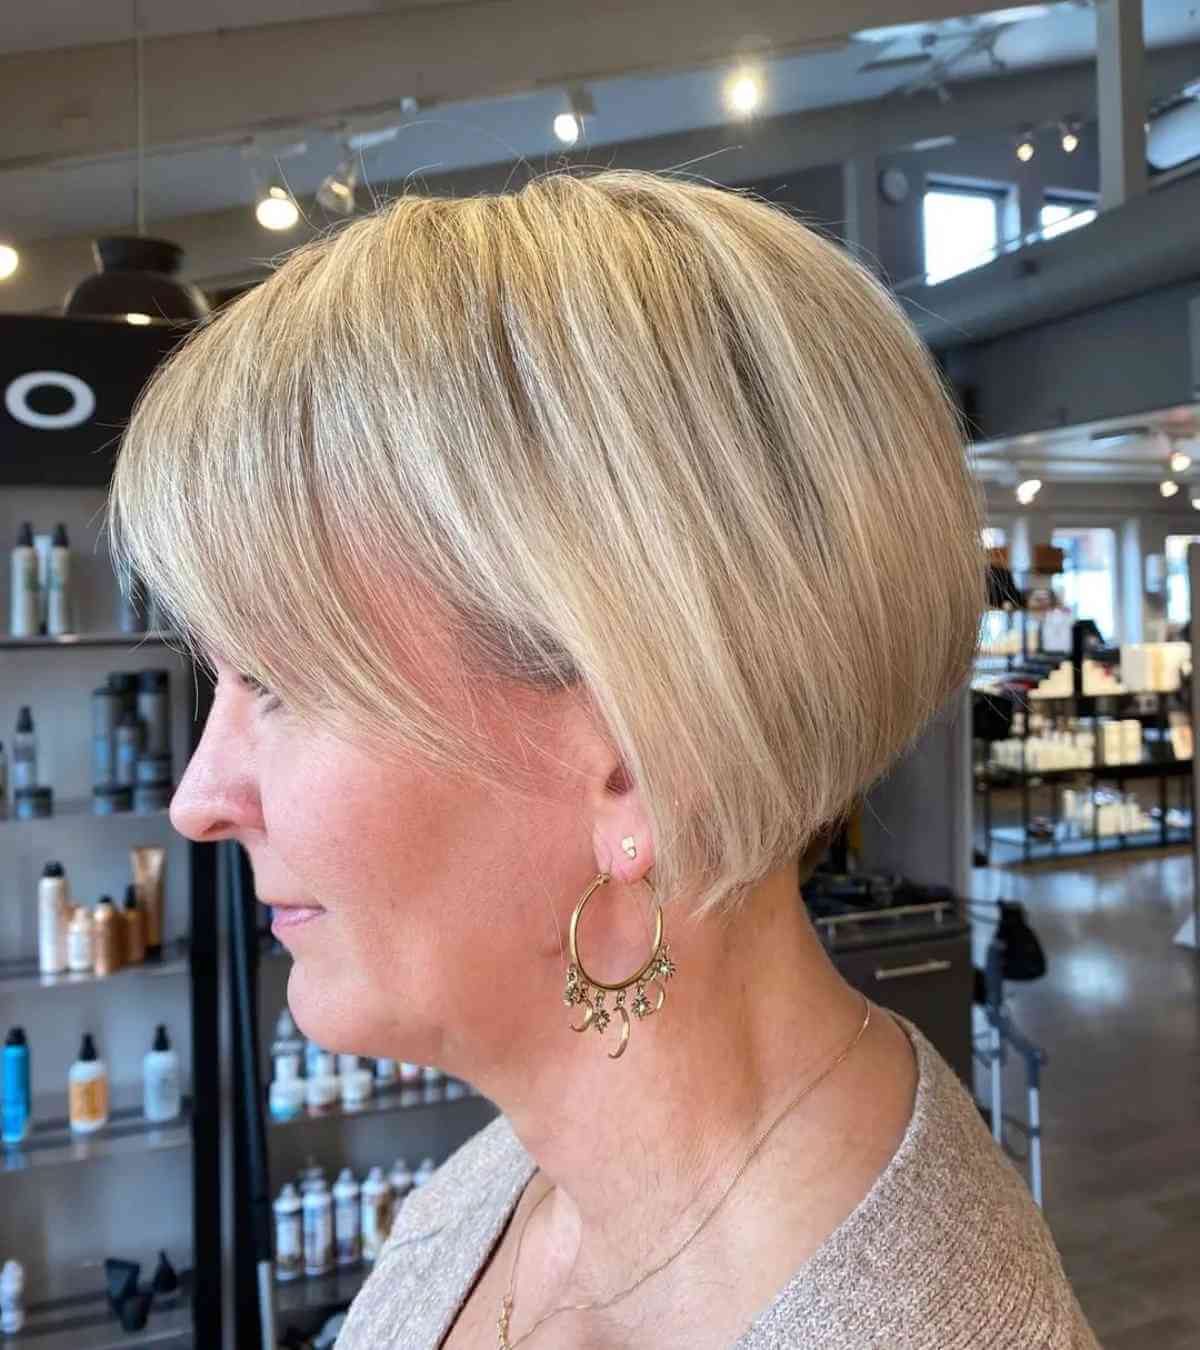 Short Ear-Length Angled Cut with Side Bangs